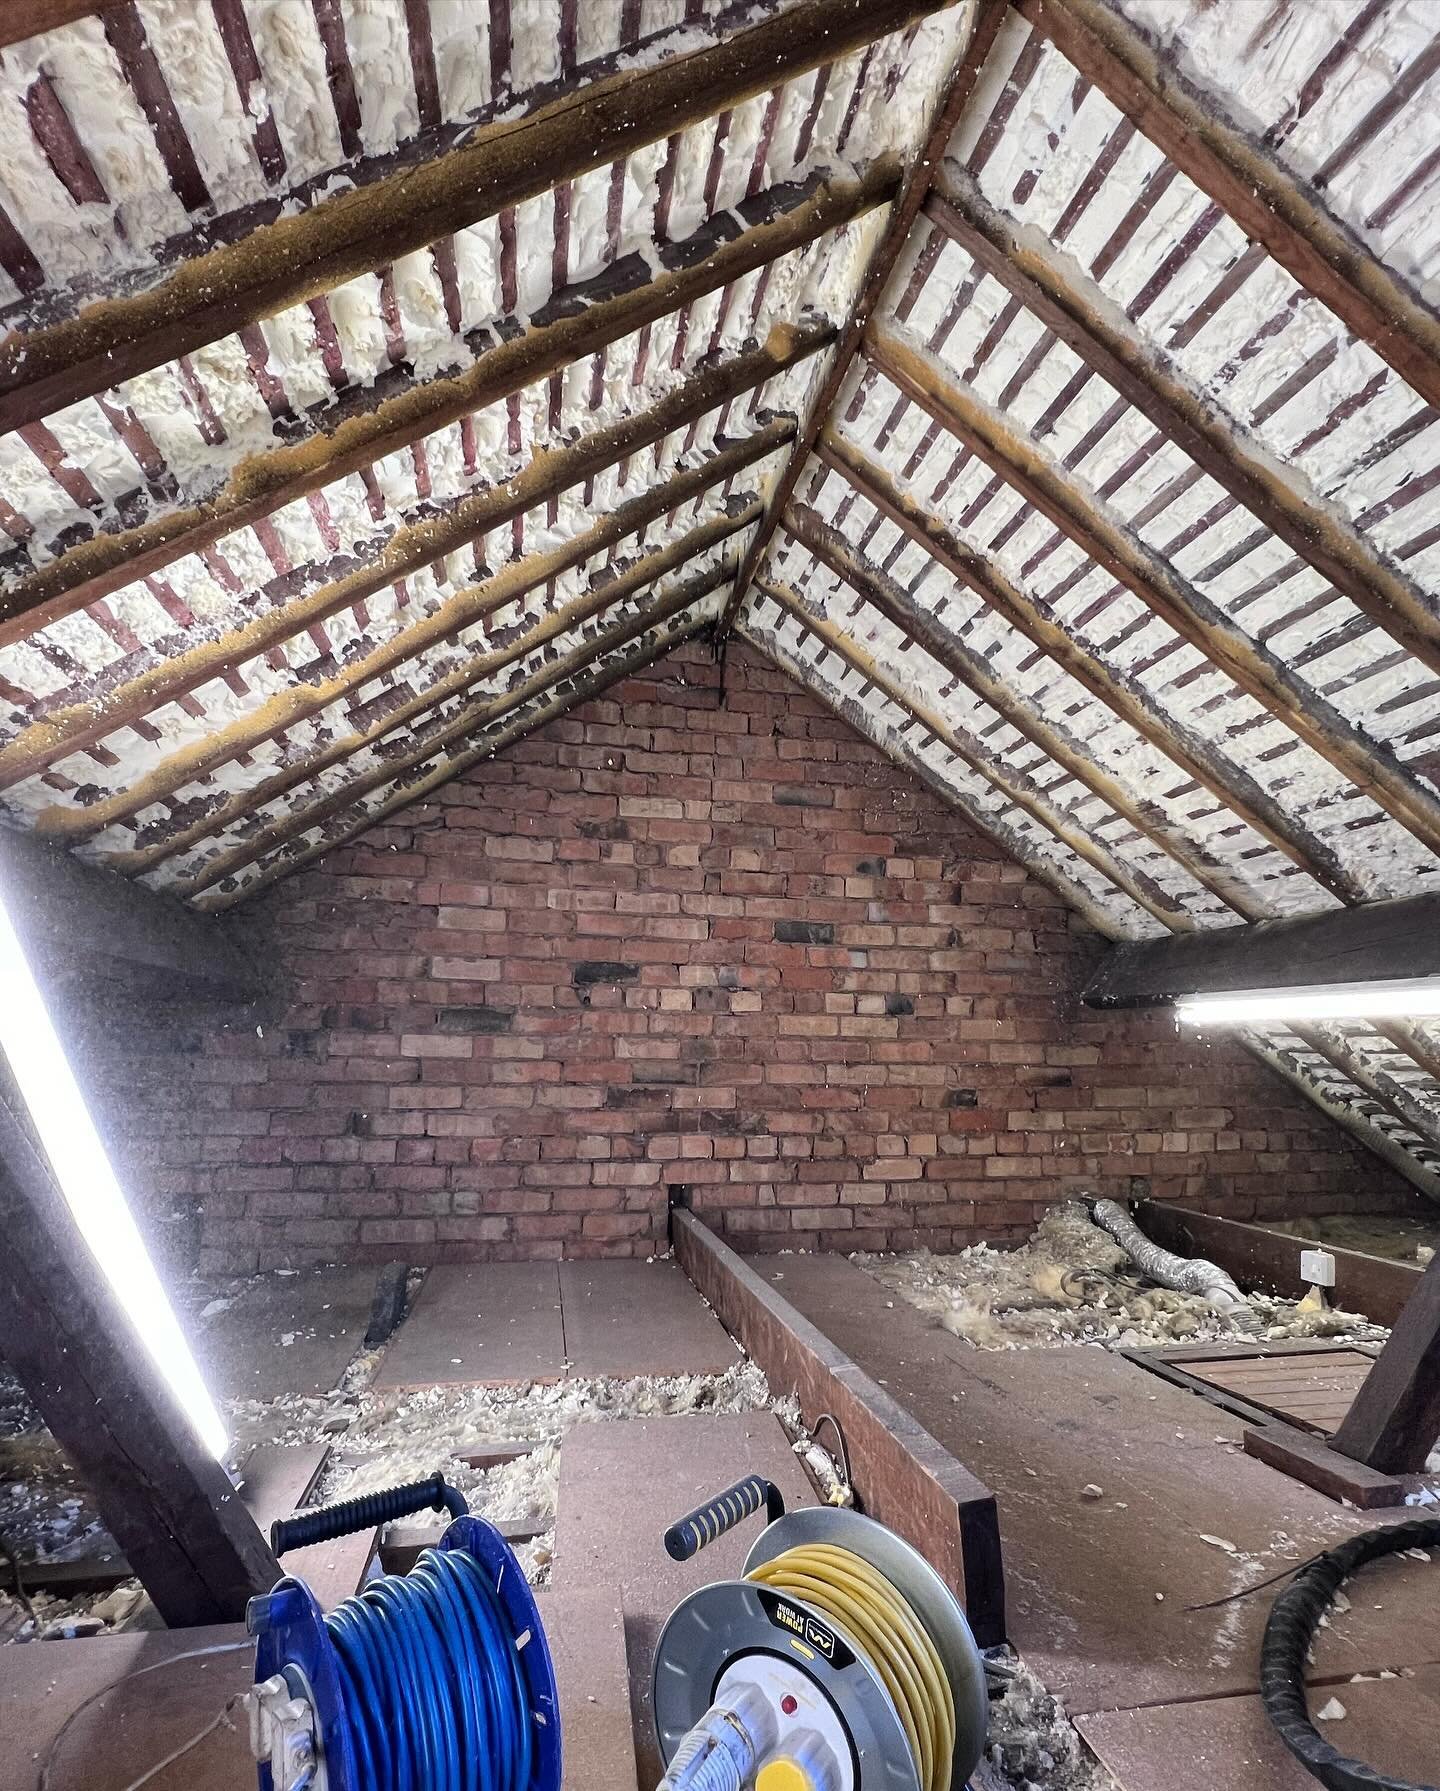 Closed cell spray foam insulation removal 

Job complete ✅

✉️ hello@iceblasters.co.uk 
📞 01604 266256
🚨 Nationwide coverage 
🌎 www.iceblasters.co.uk

#dryice #dryiceblasting #mobile #dryicecleaning #nationwide #service #home #homeproject #homeren